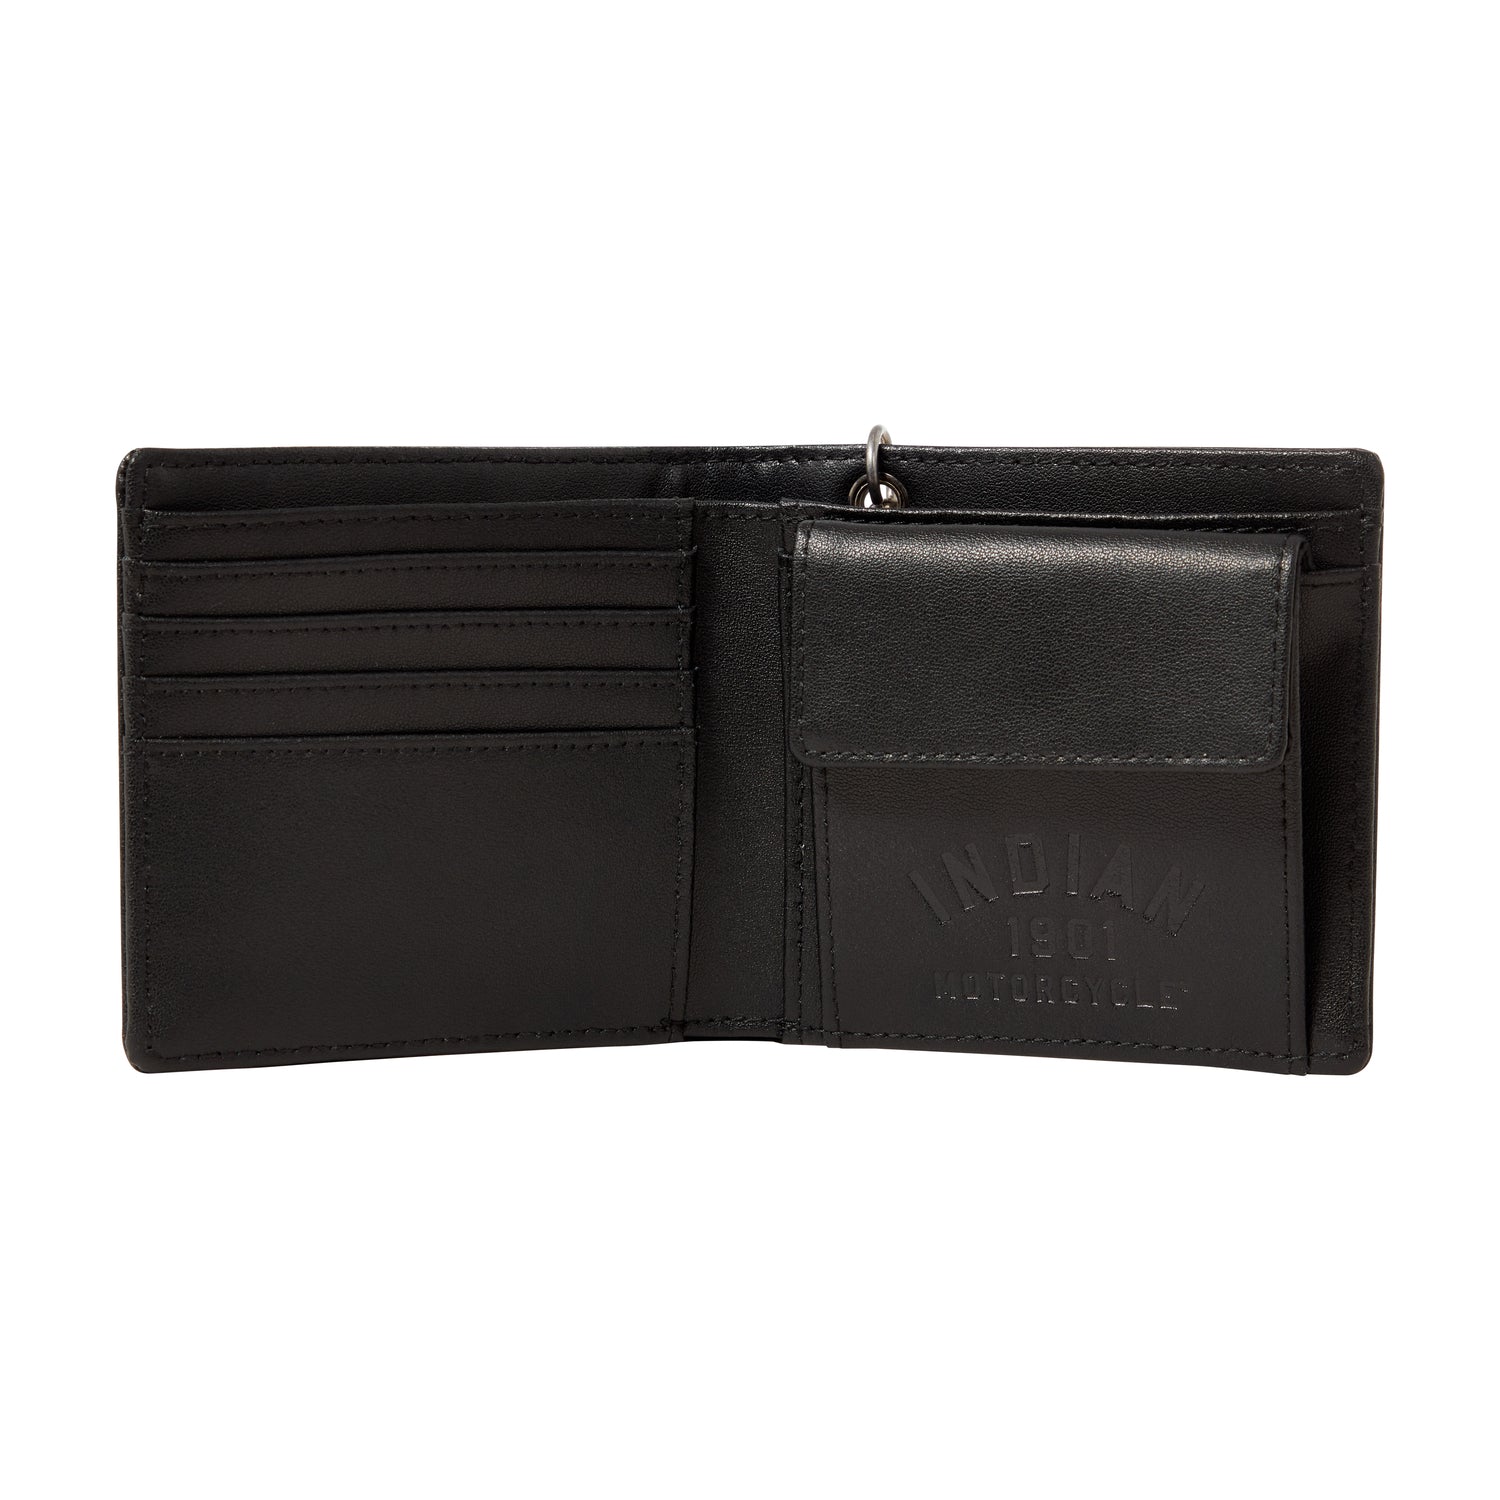 Leather Chain Wallet, Black